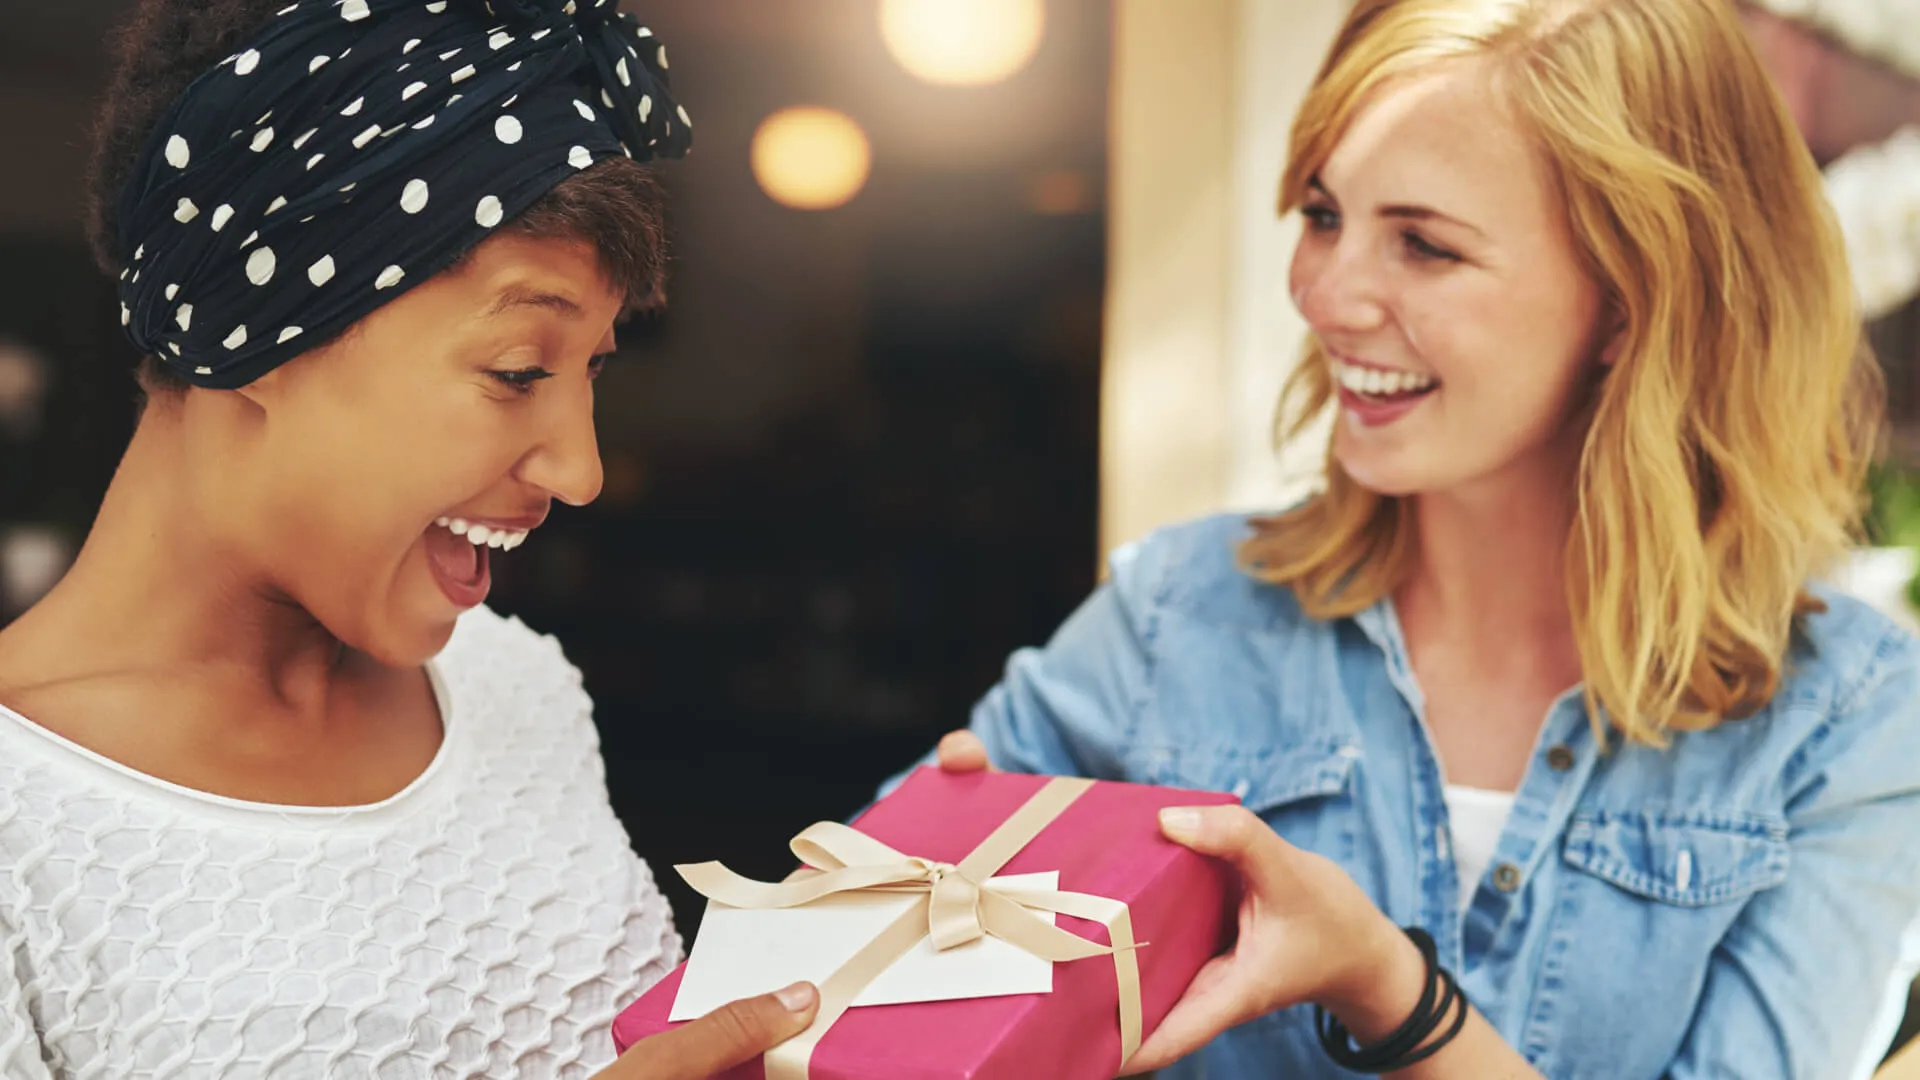 woman giving friend a gift